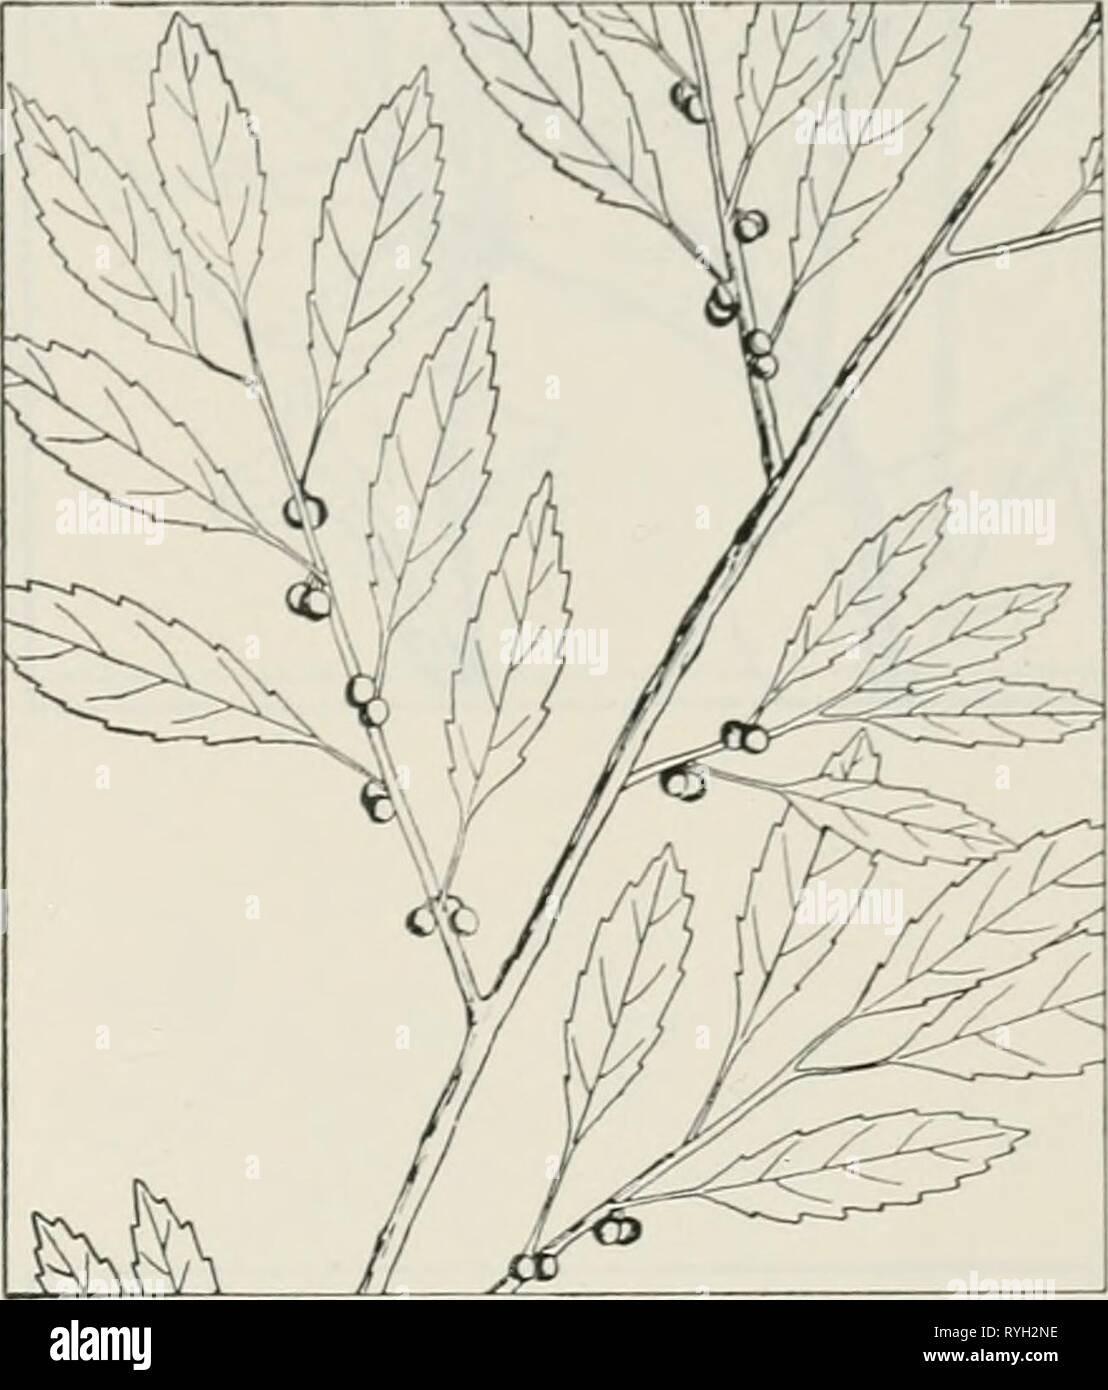 The drug plants of Illinois  drugplantsofilli44teho Year: 1951  Tehon THE DRUG PLANTS OF ILLINOIS 67 ILEX VERTIGILLATA (L.) Gray. Black alder, common winterberry, false alder, fever bush. Aquifoliaceae.— A small to moderate, unarmed, deciduous shrub 6 to 8 feet tall; bark of the stem grayish, warty with corky lenticels; leaves lanceolate, acuminate, serrate, 1 to 4 inches long, alternate, rather thick, turning black in the fall; flowers greenish- or yellowish- white; fruit a small, globose, bright red, 3- to 5-seeded berry. The leaves and fruit collected, also the bark. Infrequent to rare, and Stock Photo